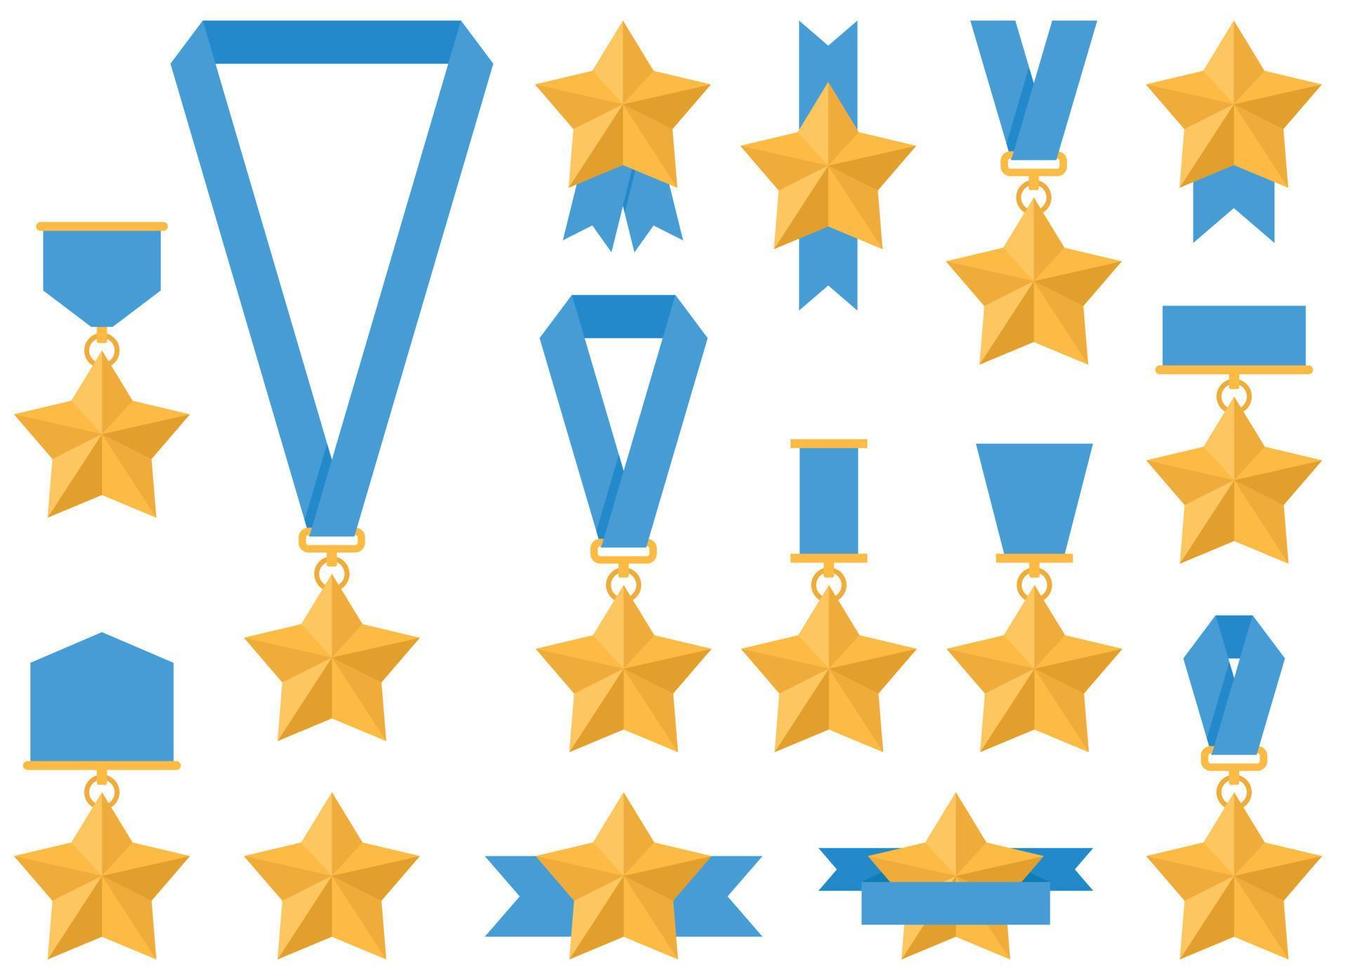 Gold star medal with blue ribbon vector illustration in flat style